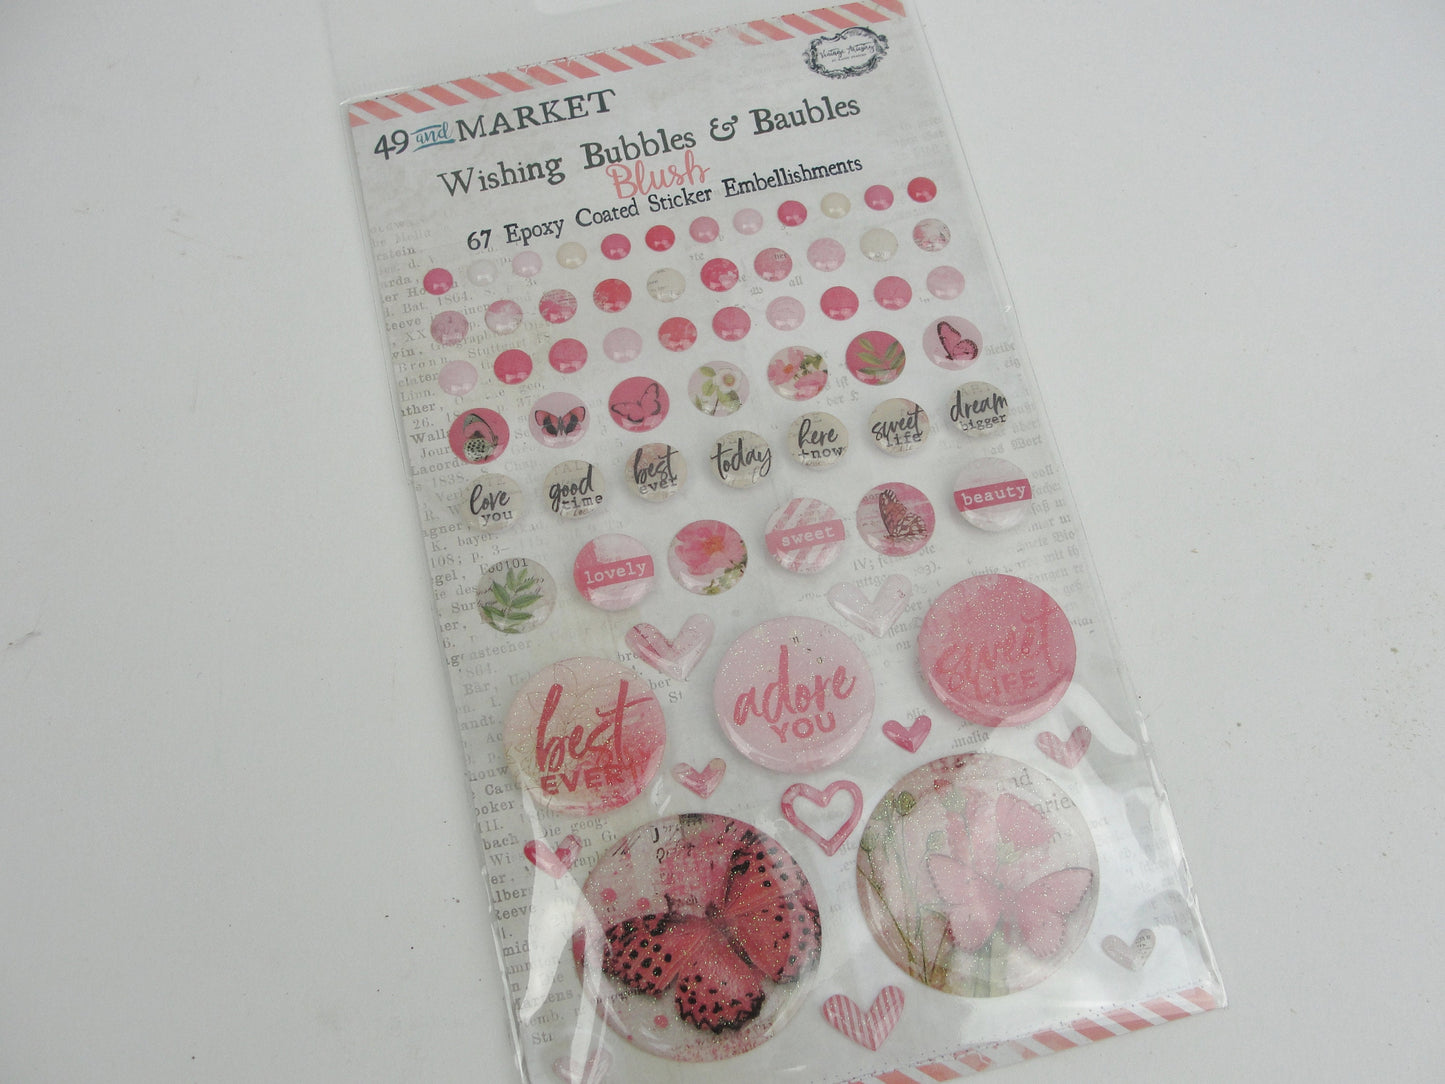 49 and Market Wishing Bubbles scrapbook and journal embellishments choose your color